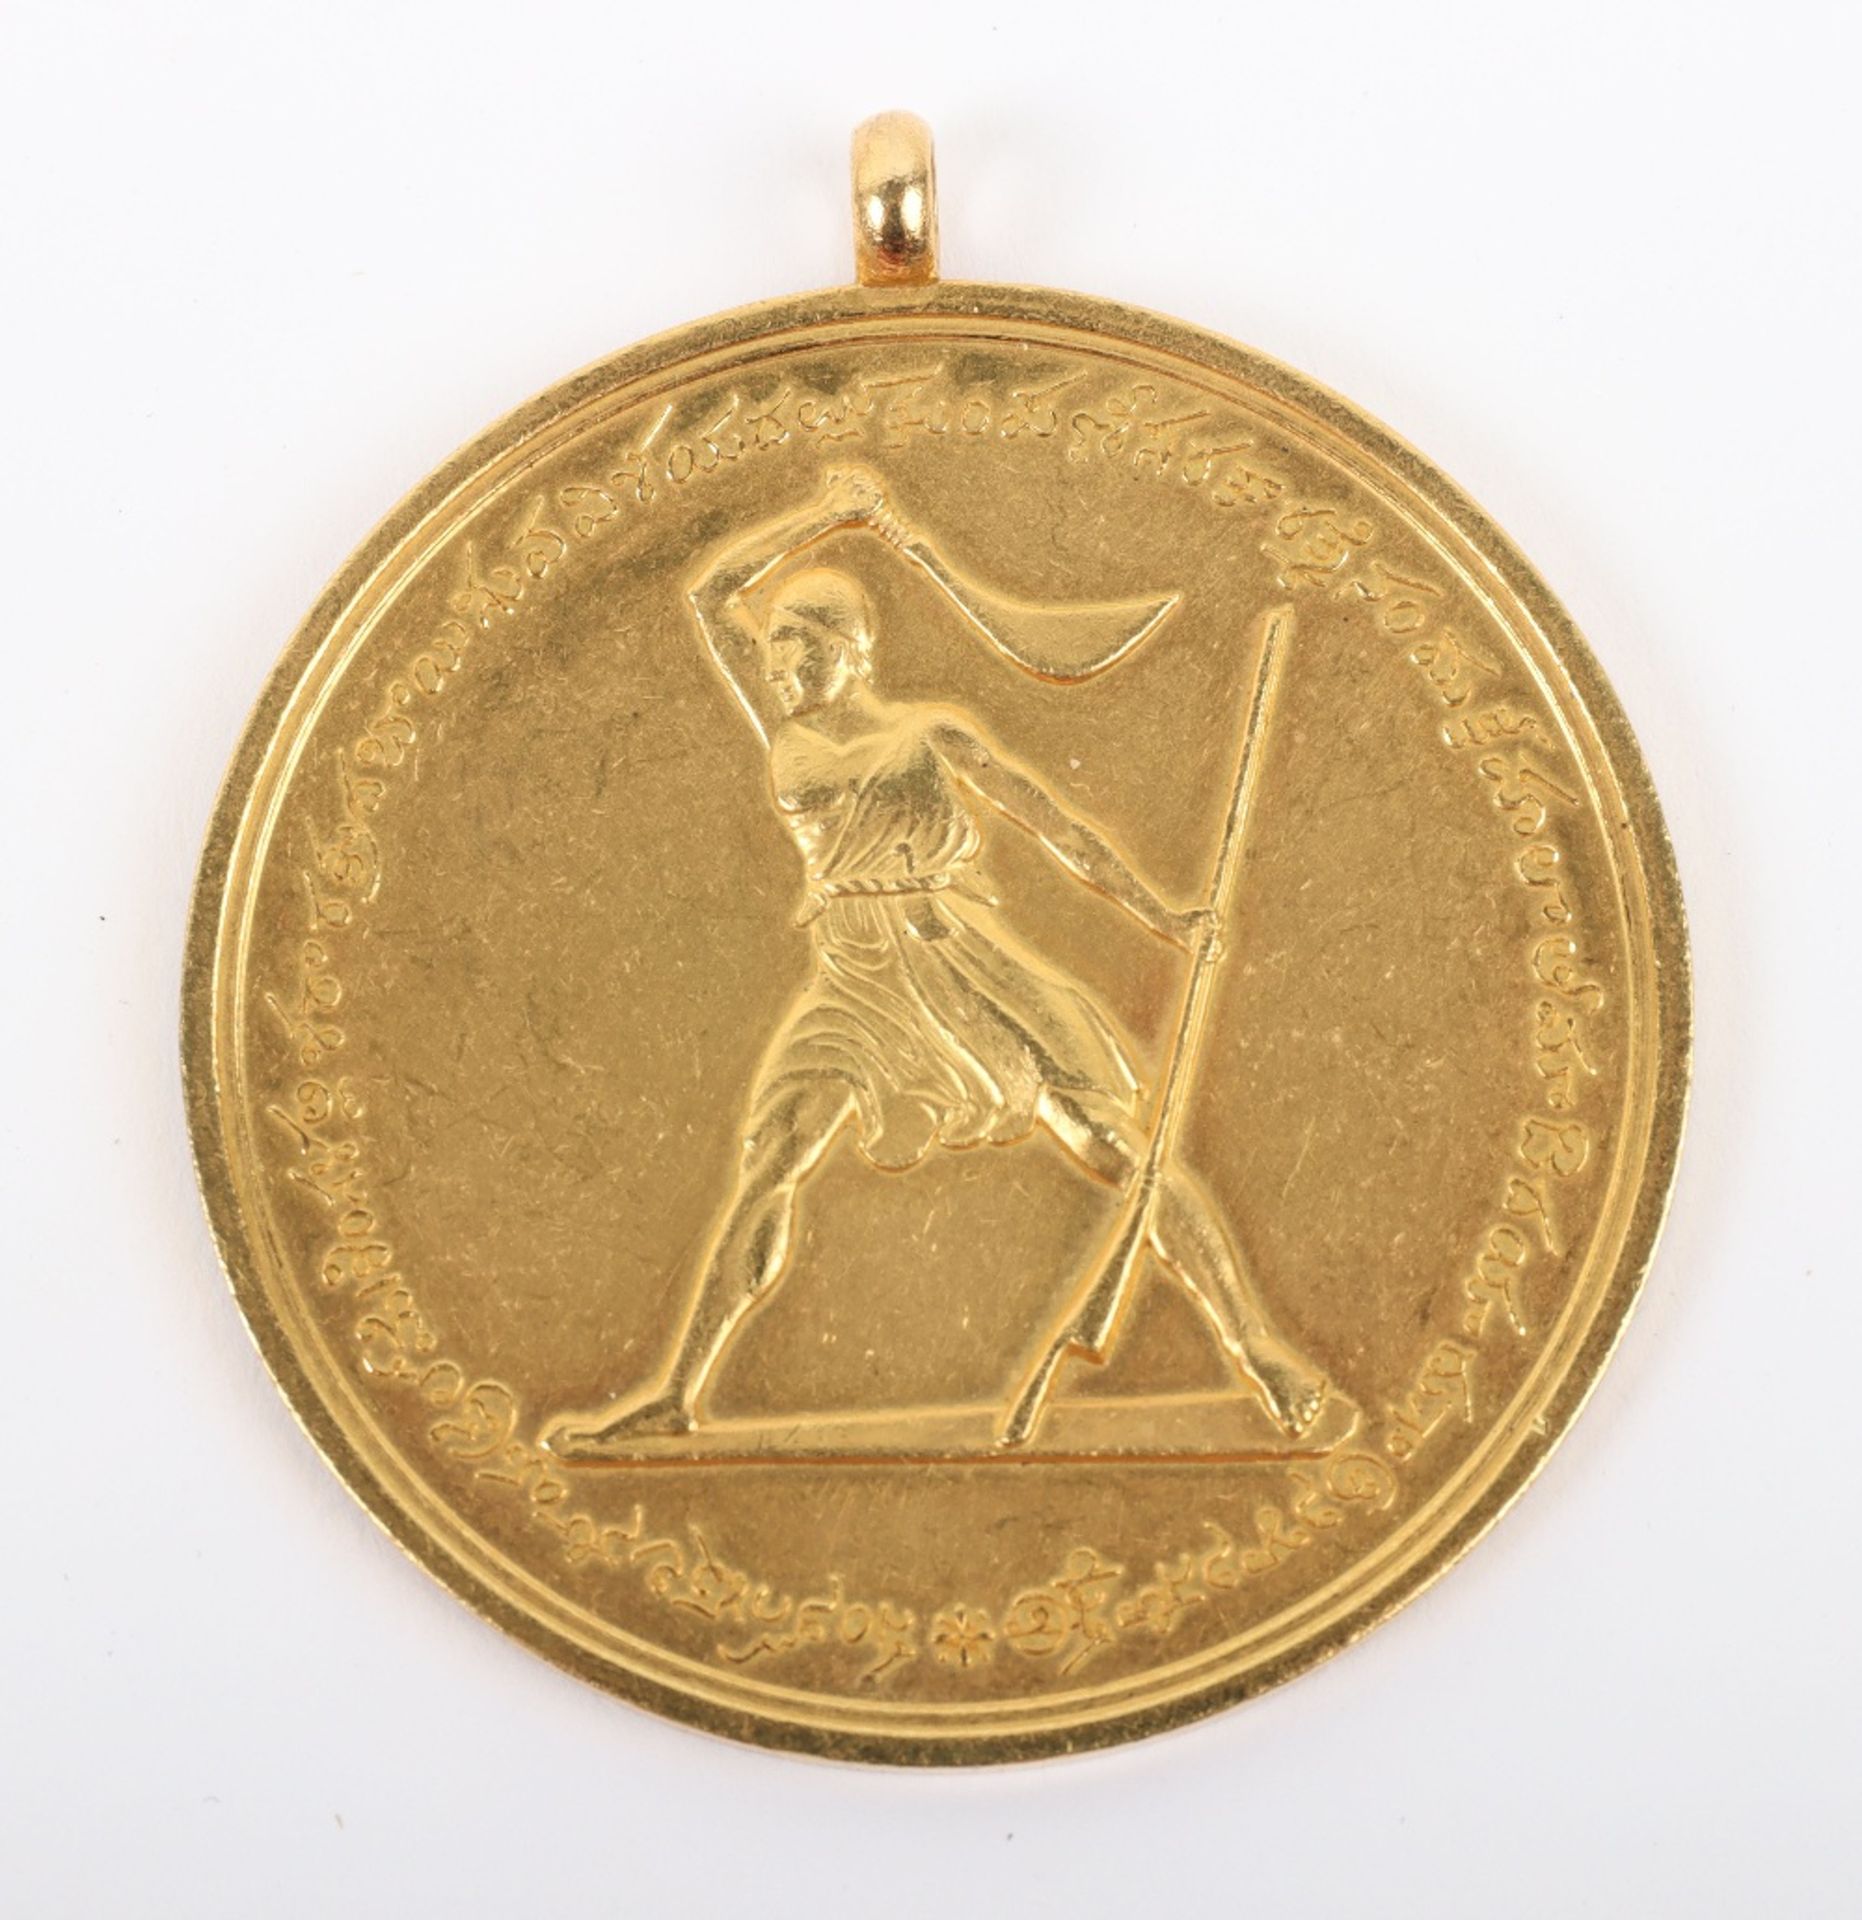 Rare Honourable East India Company Medal for the Coorg Rebellion 1837, 3rd Class Gold Medal (4 Tolas